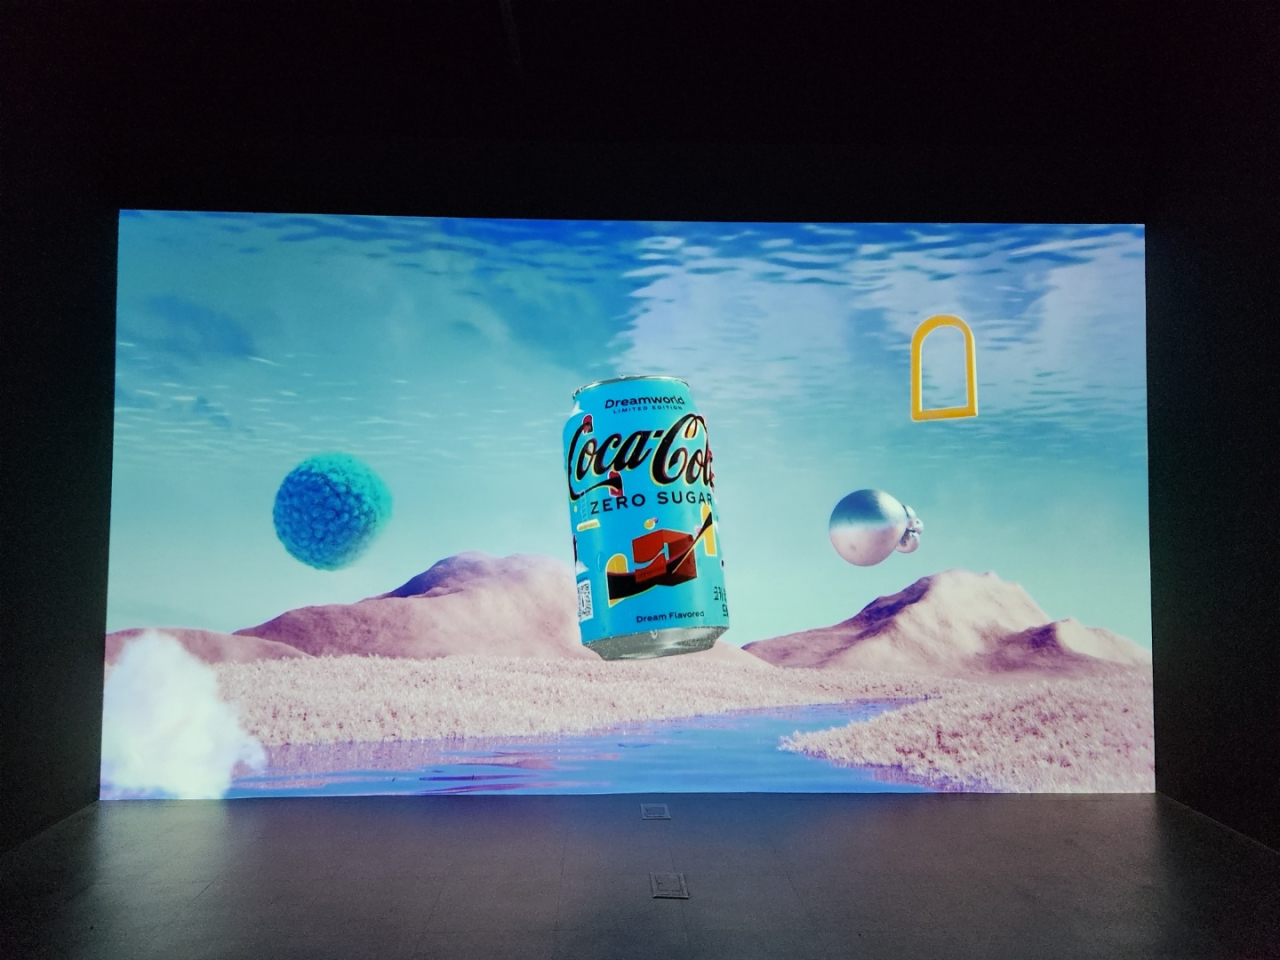 Inside Coca-Cola's Dreamworld pop-up exhibition, in collaboration with local media art company d'strict, at the Wisepark Hongdae in Seoul. (Choi Jae-hee / The Korea Herald)